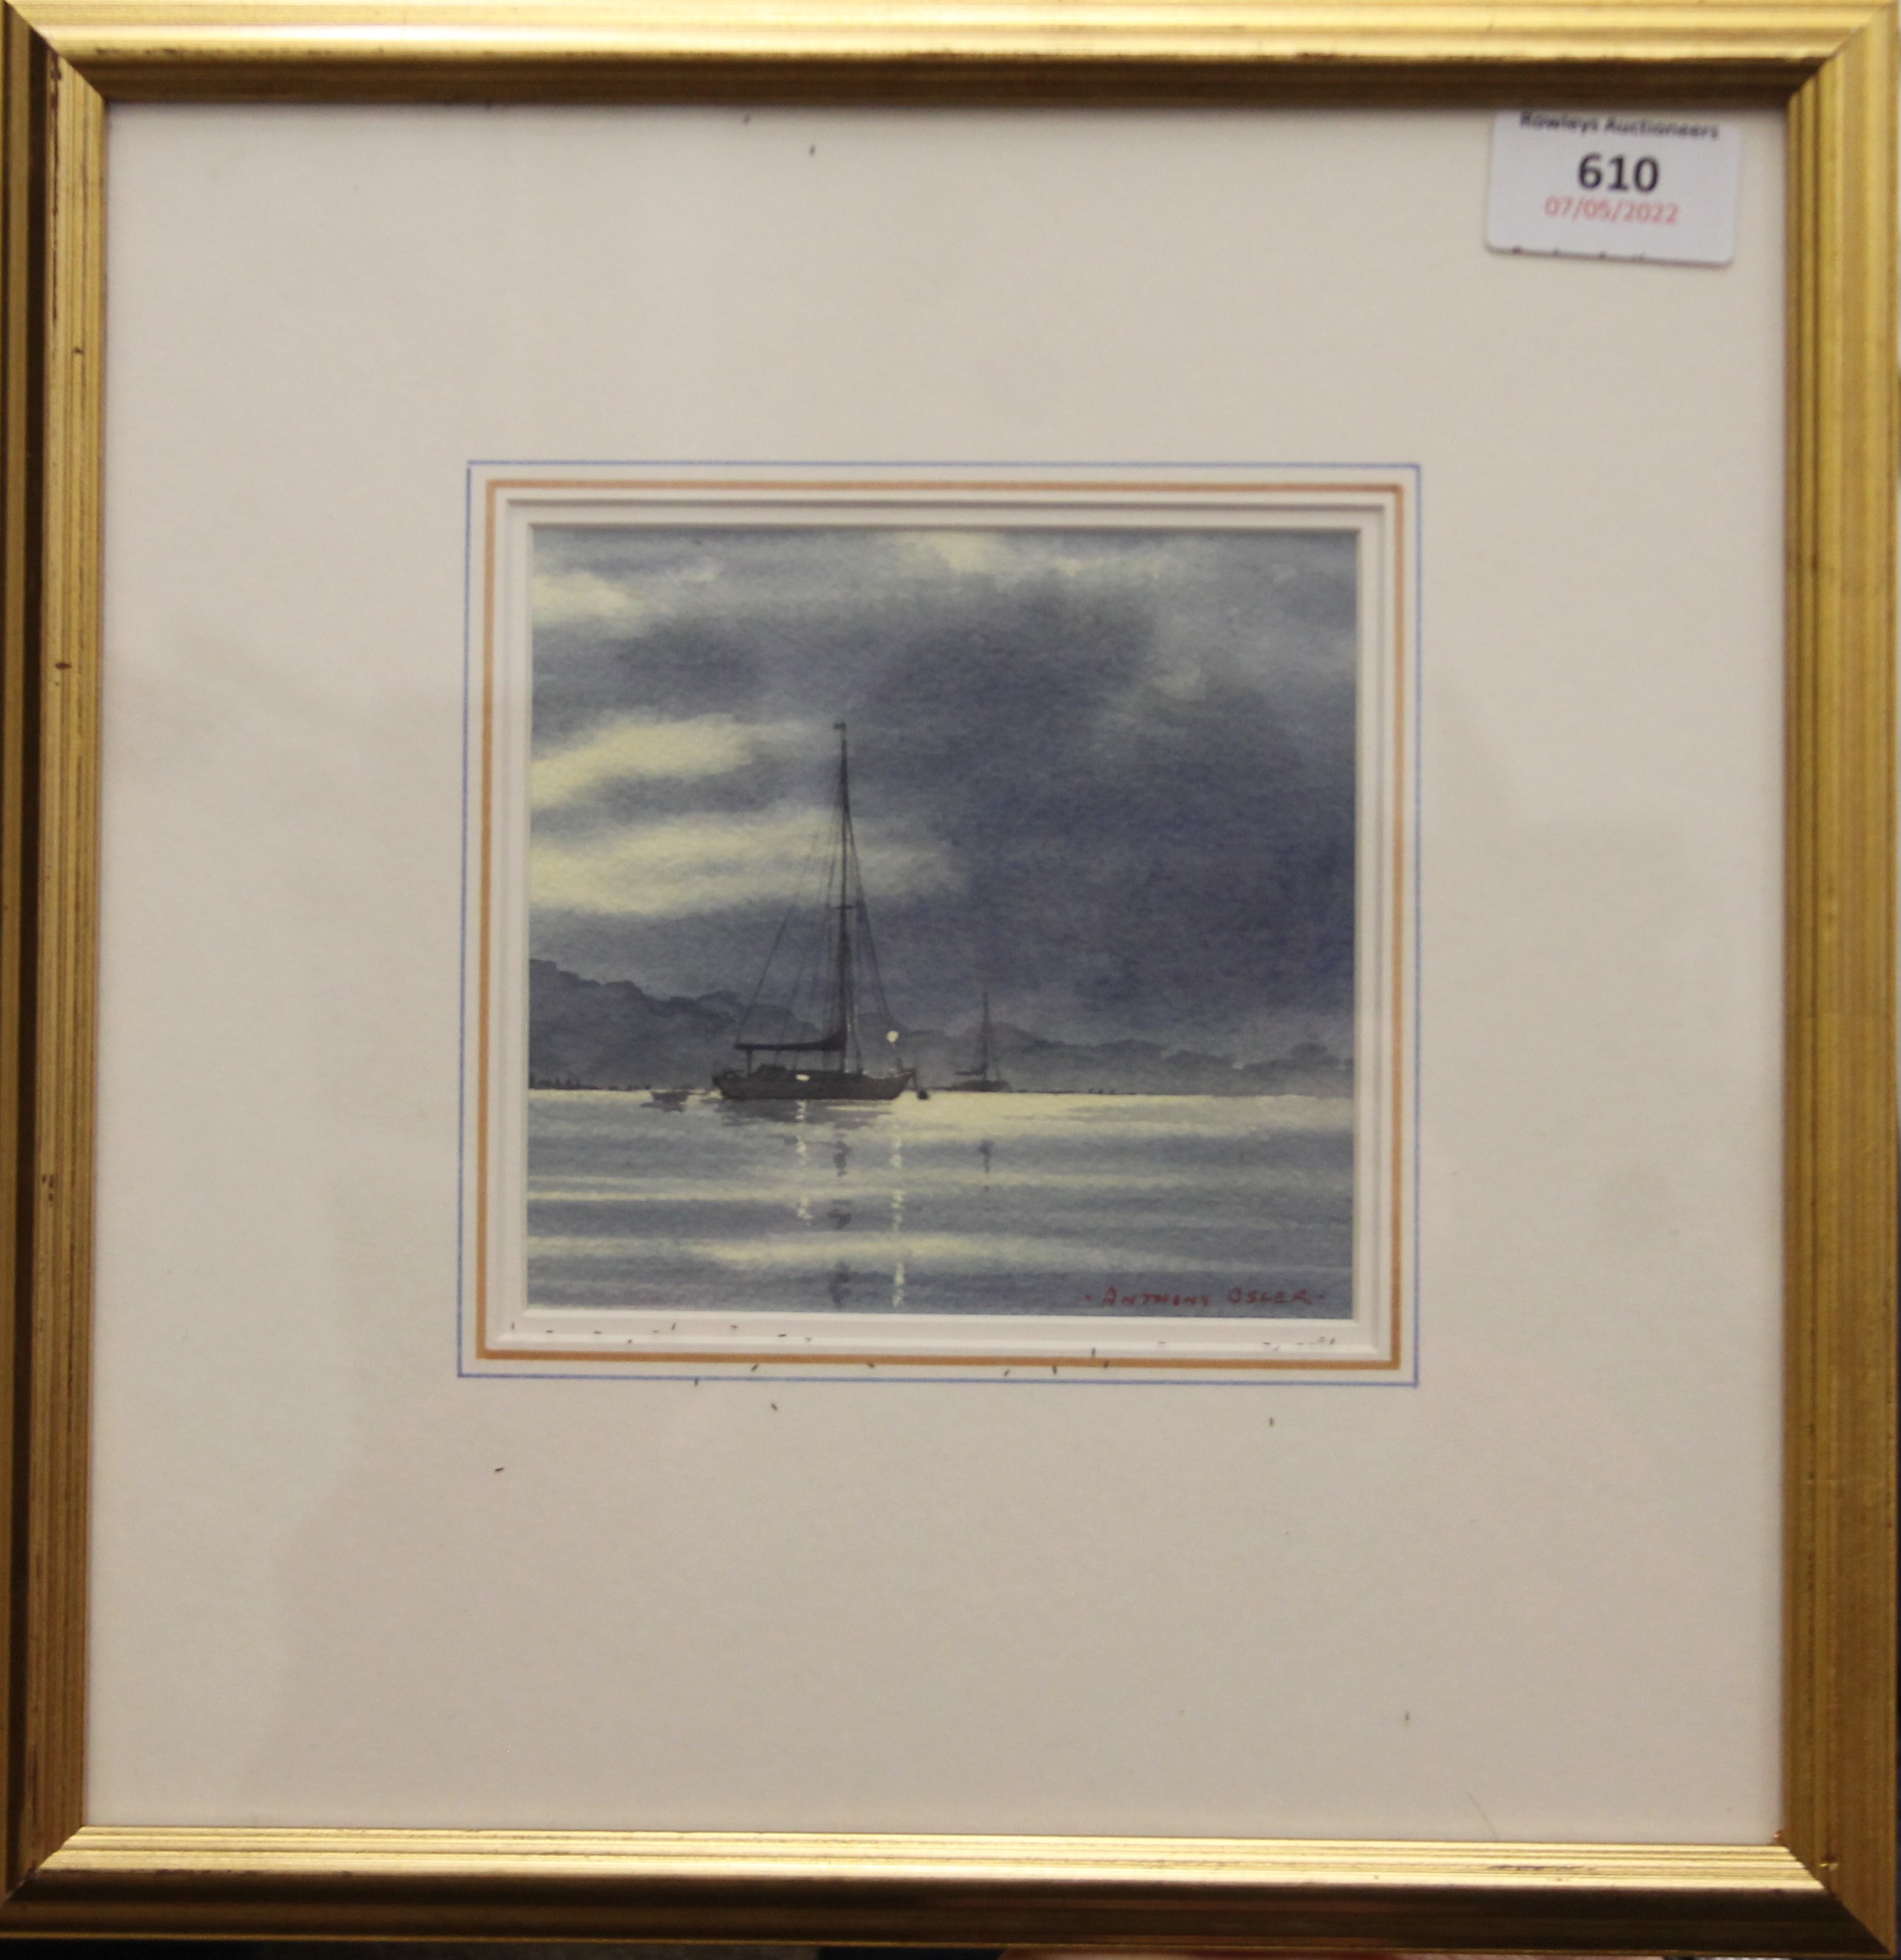 ANTHONY OSLER (born 1938), 'Boat on Water', watercolour, signed, framed and glazed. 12.5 x 12 cm. - Image 2 of 3